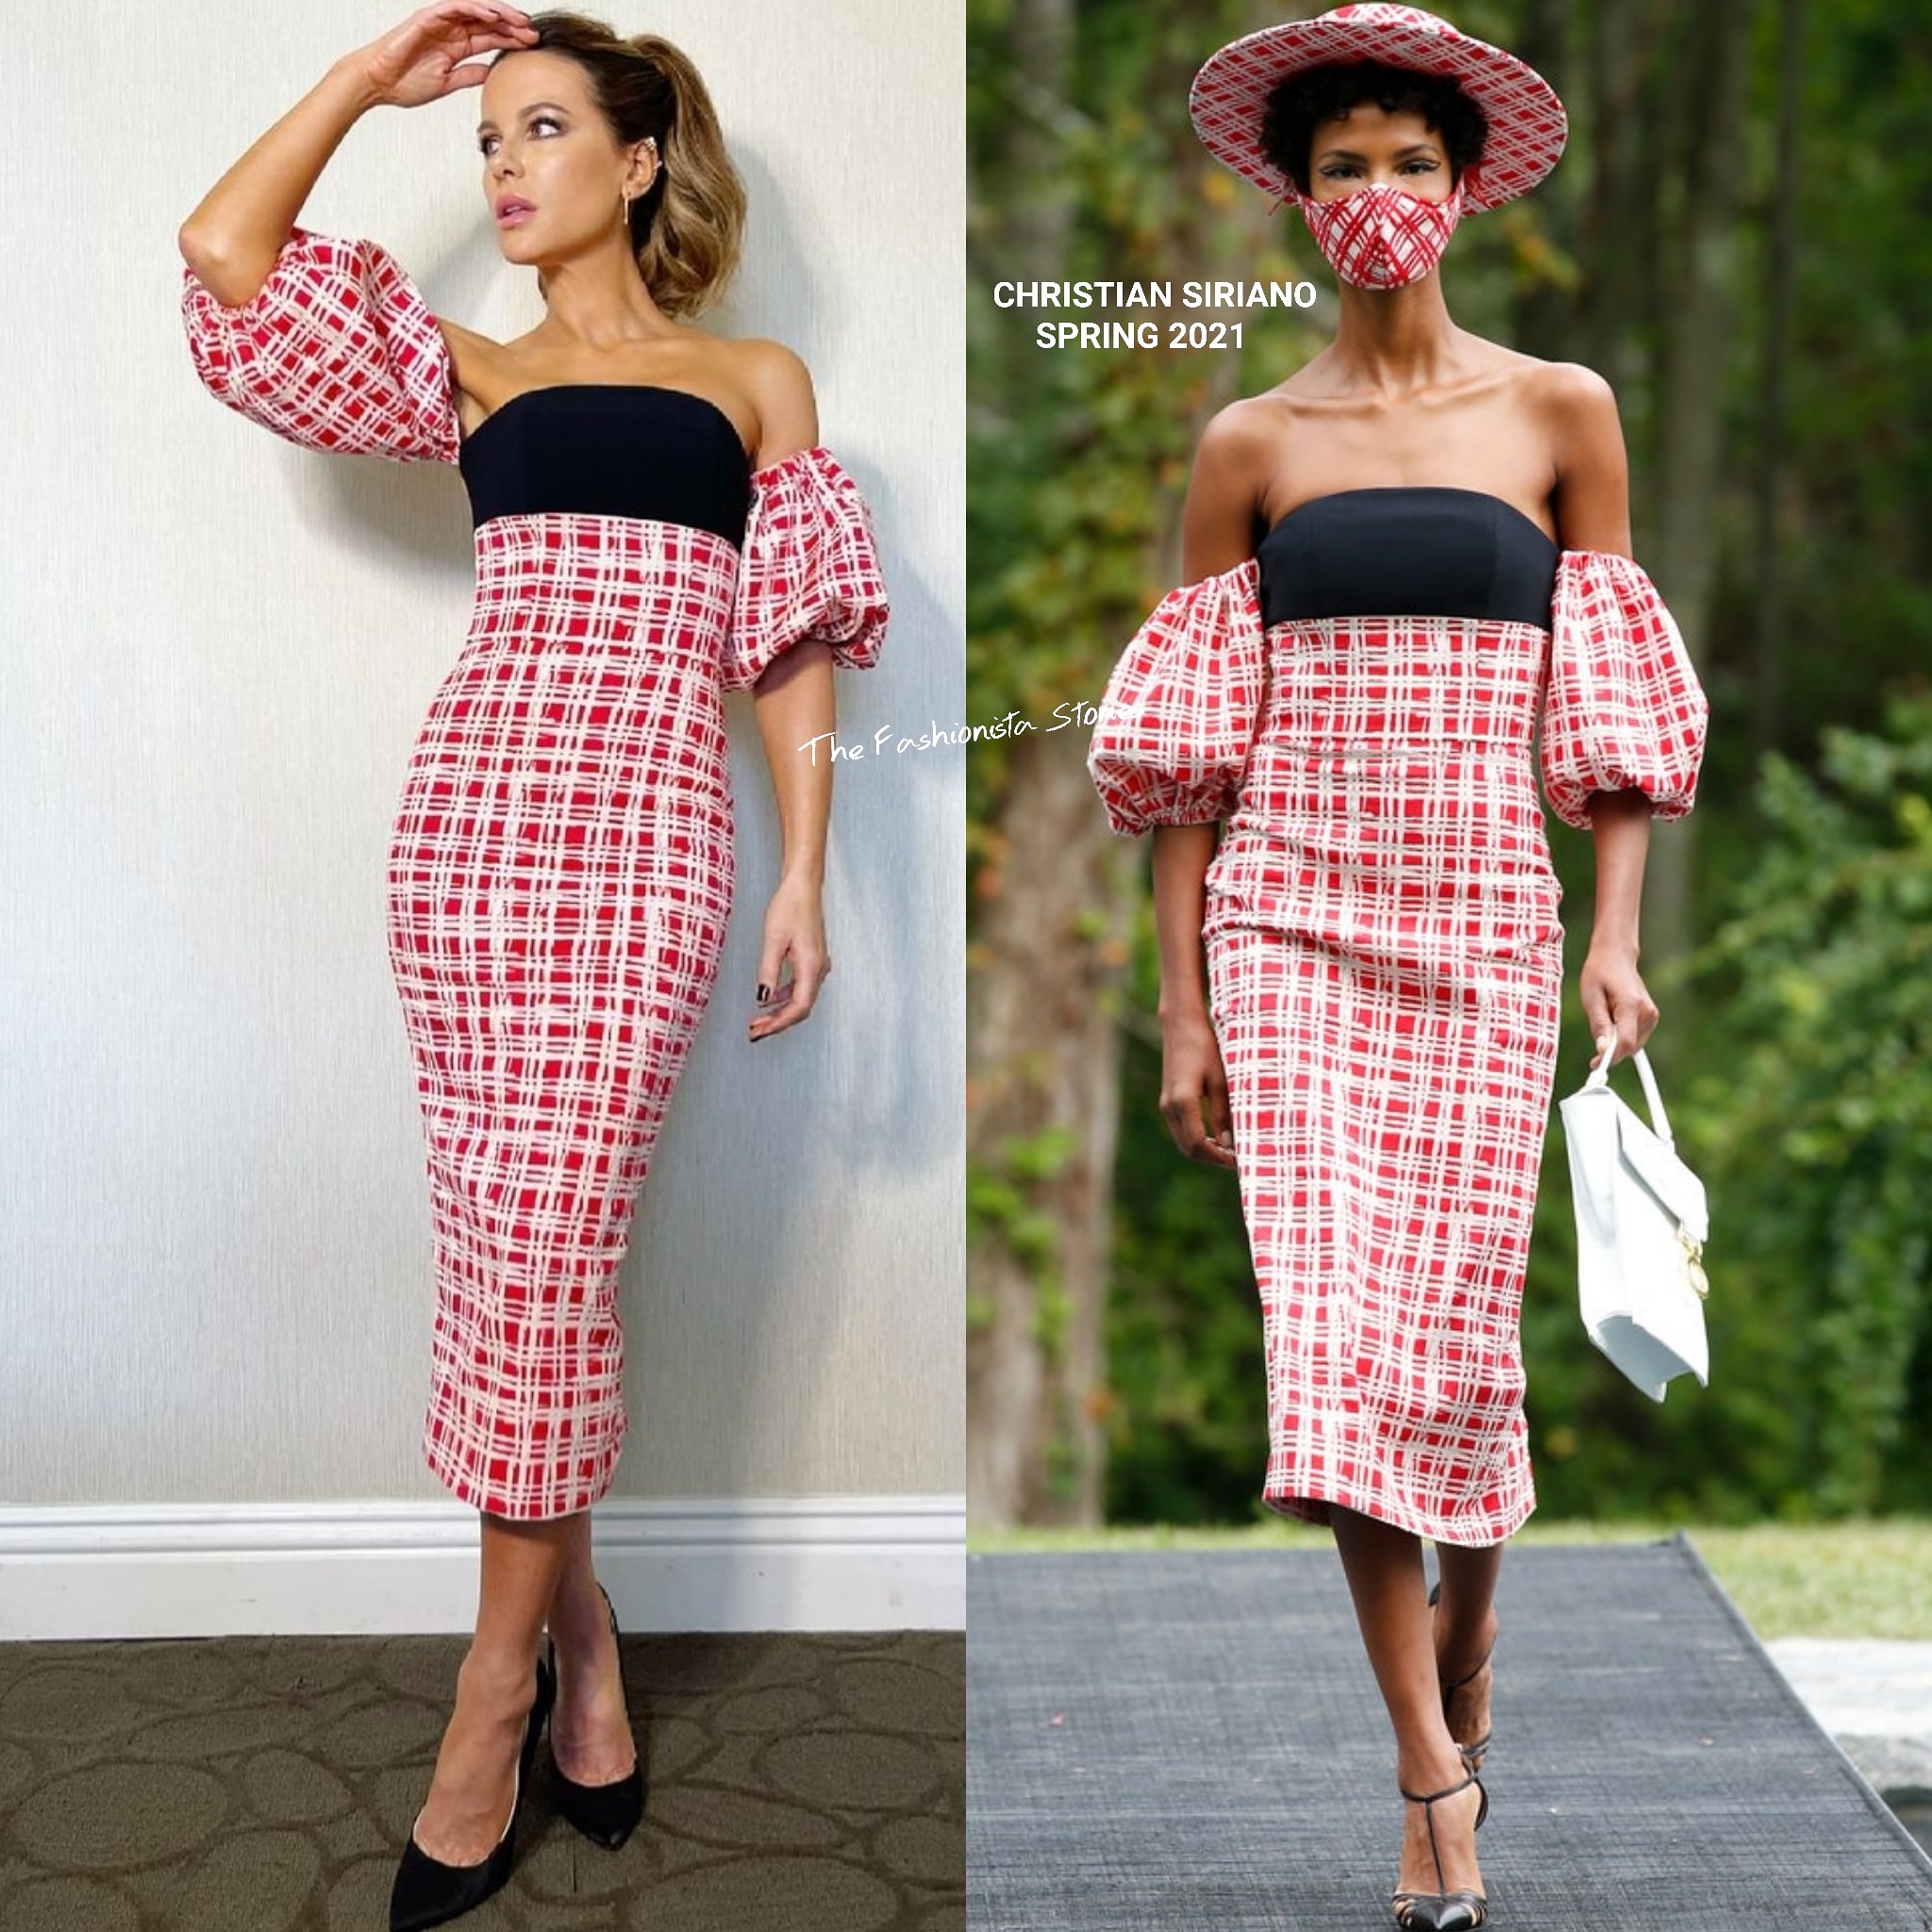 Instagram Style: Kate Beckinsale in Christian Siriano